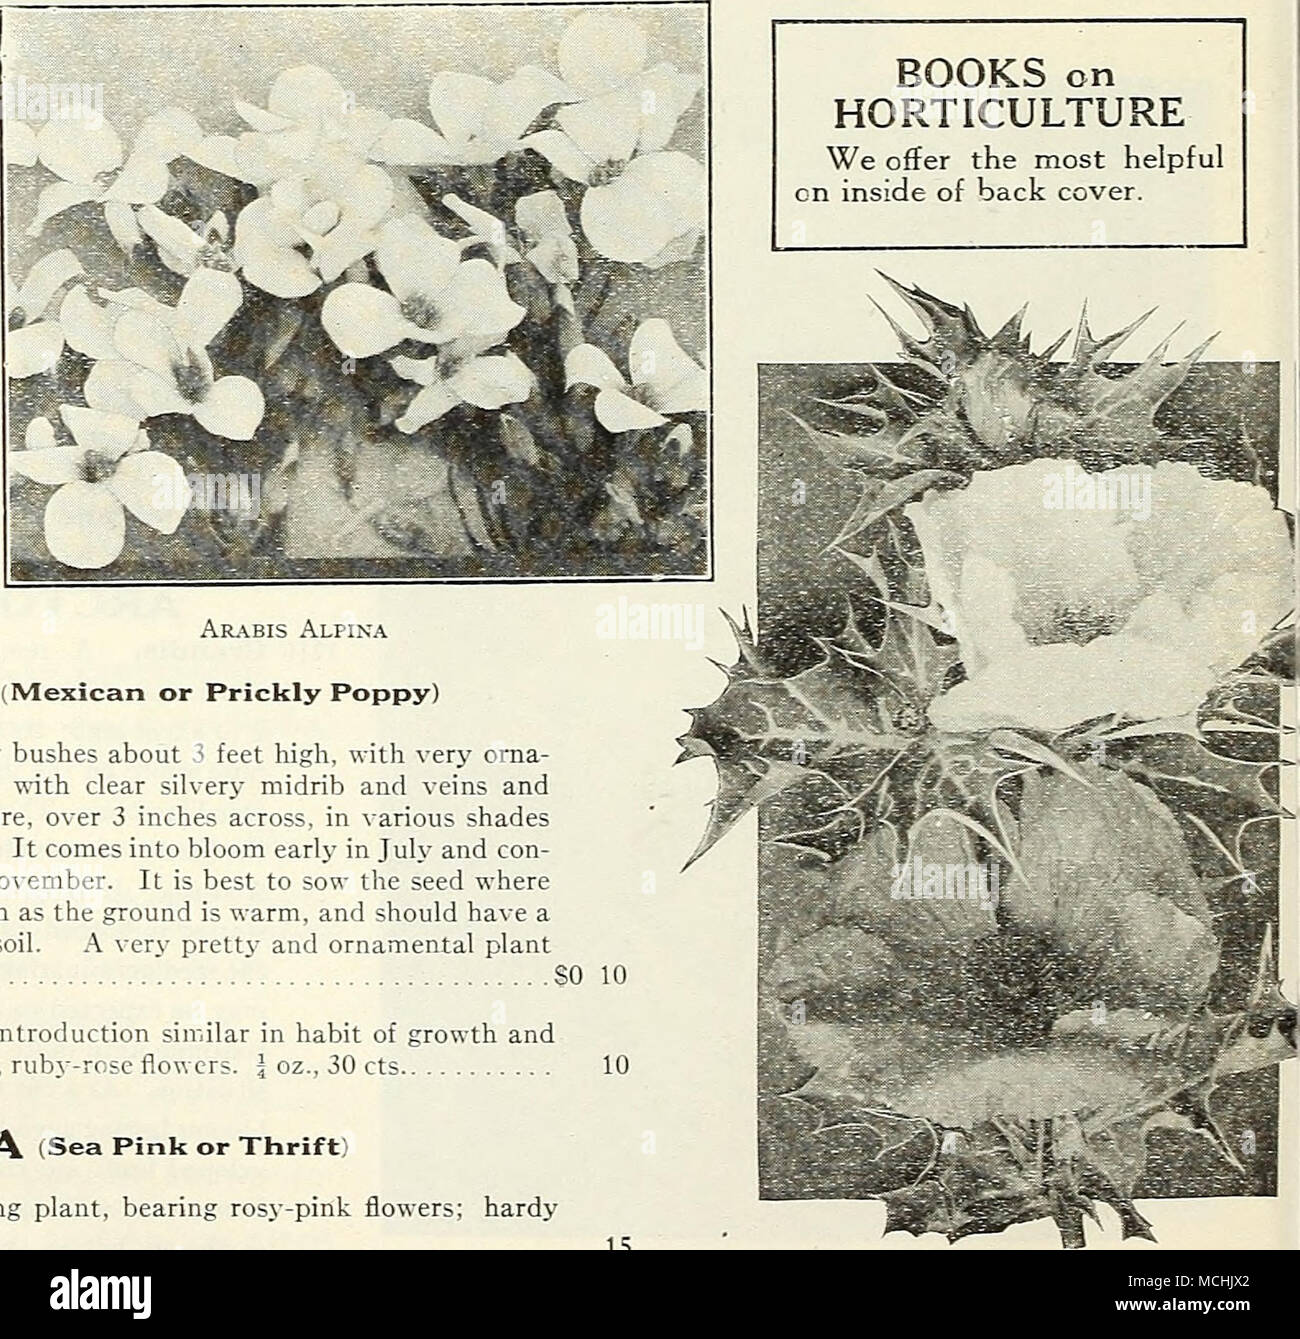 . BOOKS on HORTICULTURE We ofler the most helpful en inside of back cover. Arabis Alpina ARGEMONE (Mexican or Prickly Poppy) 1220 Hybrida Grandiflora. Sturdy bushes about 3 feet high, with very orna- mental pale green, spiny foliage, with clear silvery midrib and veins and poppy-like flowers of satiny texture, over 3 inches across, in various shades from rich yellow to creamy-white. It comes into bloom early in July and con- tinues without interruption till November. It is best to sow the seed where they are intended to bloom as soon as the ground is warm, and should have a sunnj- location, an Stock Photo